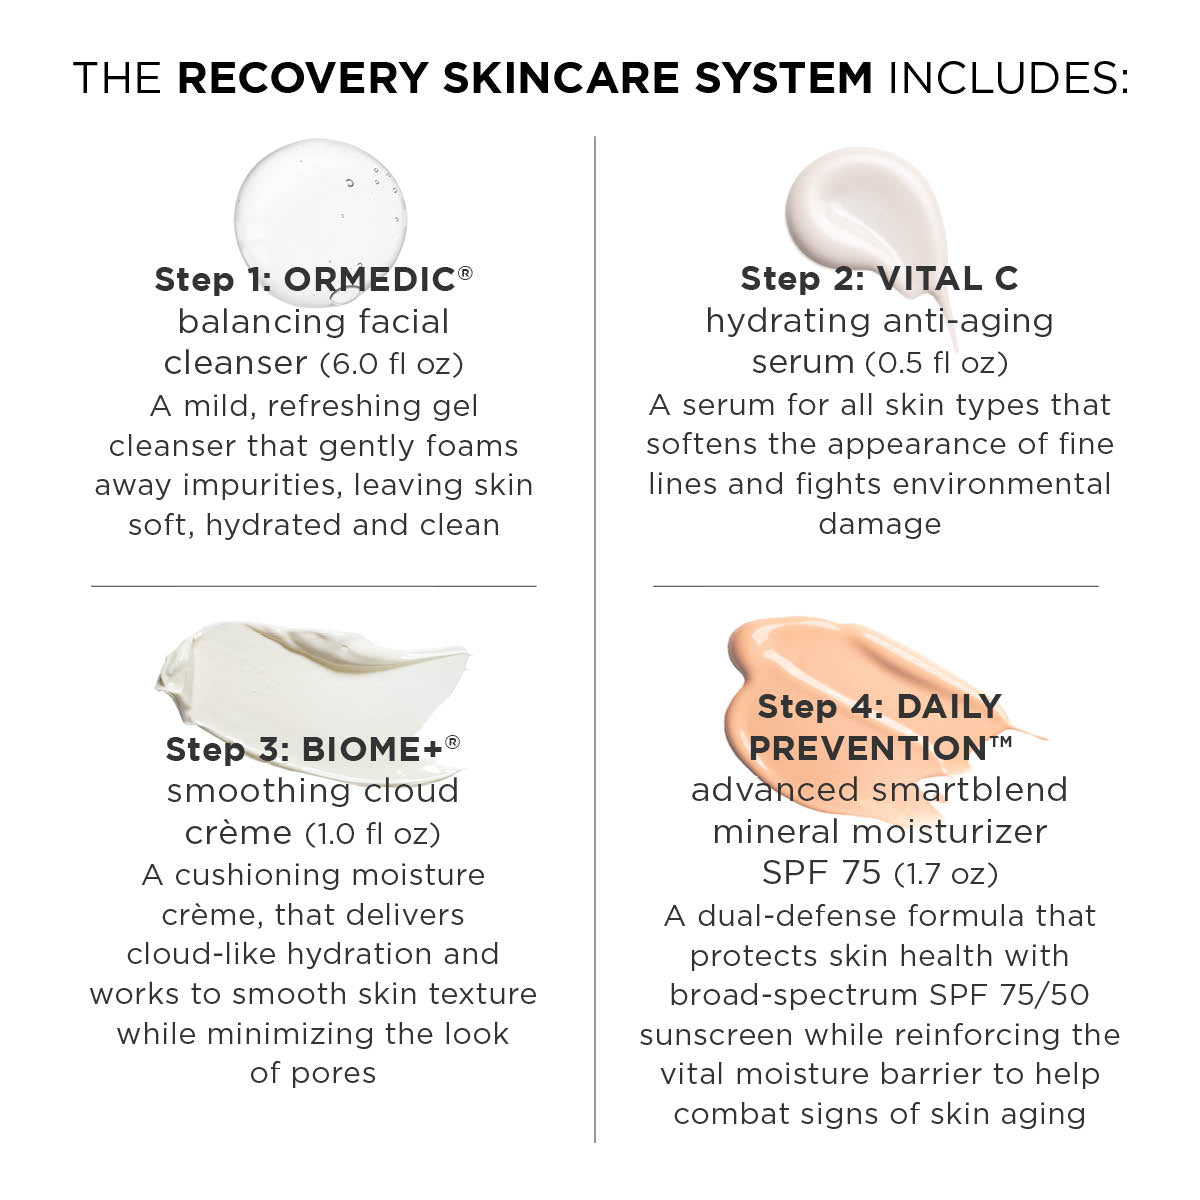 Recovery skincare system